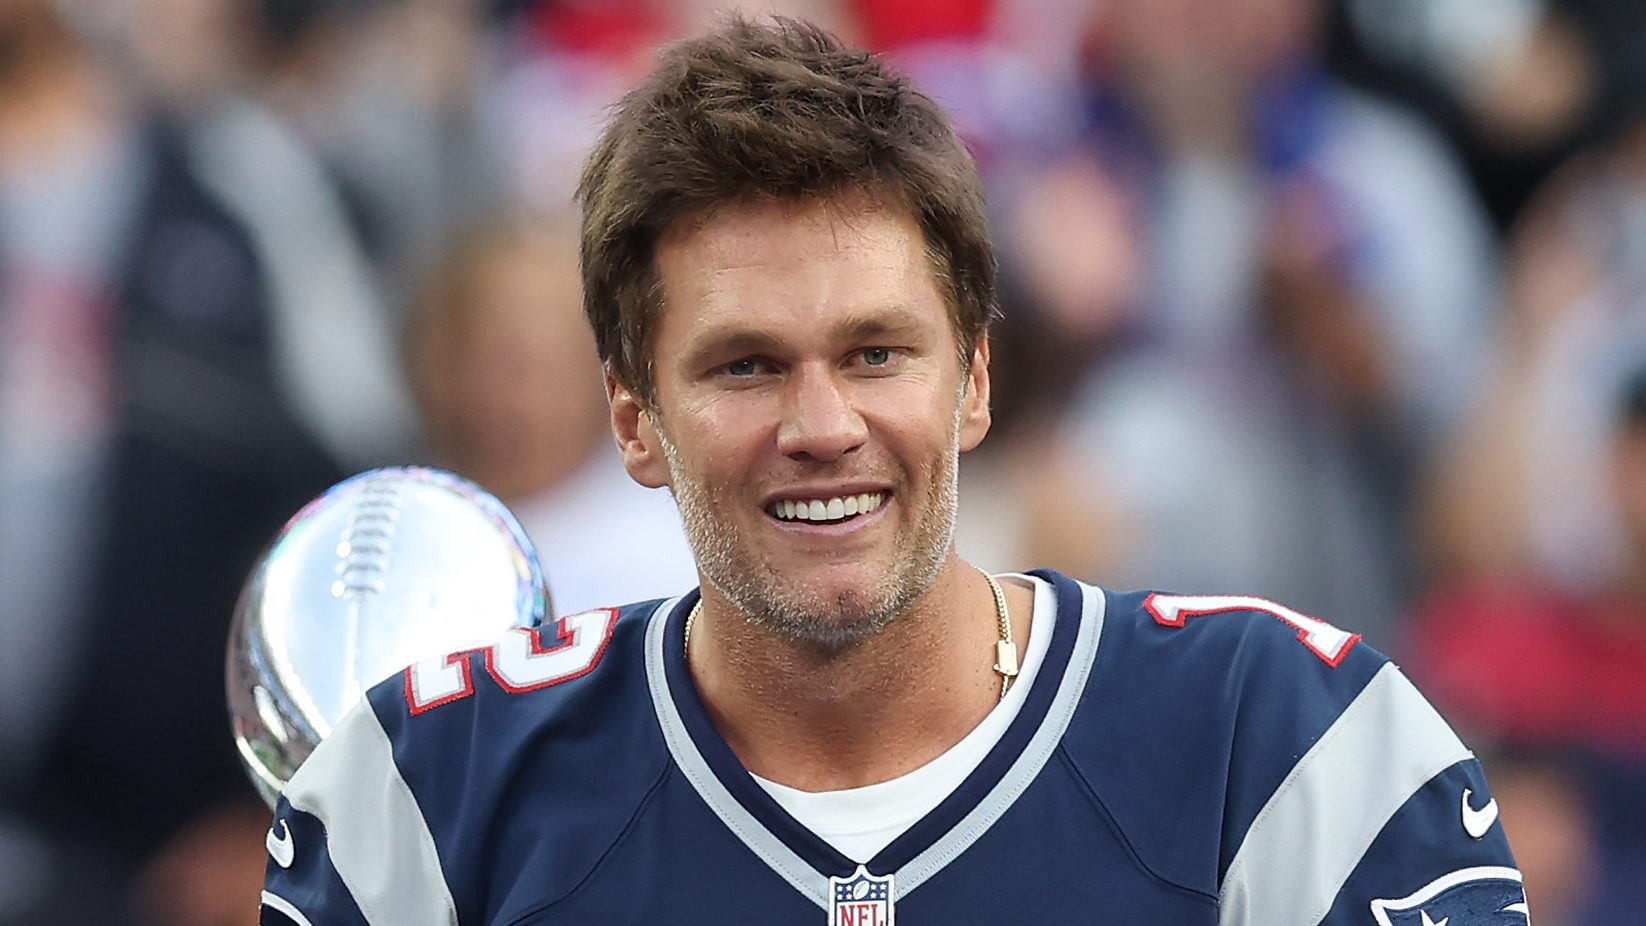 Why did Tom Brady leave Patriots for Buccaneers?